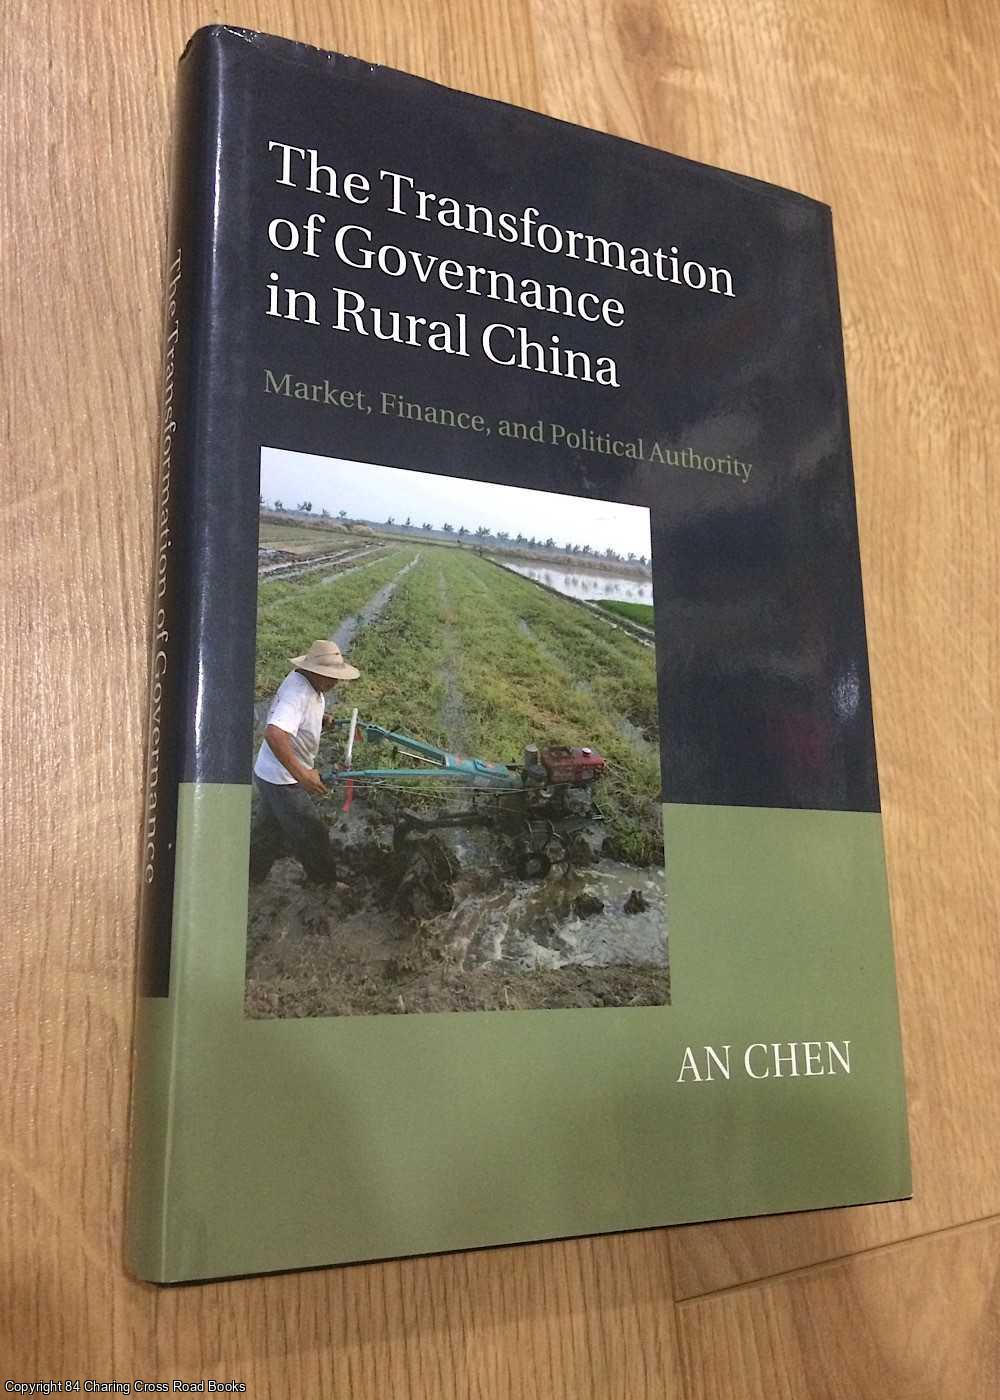 Chen, An - The Transformation of Governance in Rural China